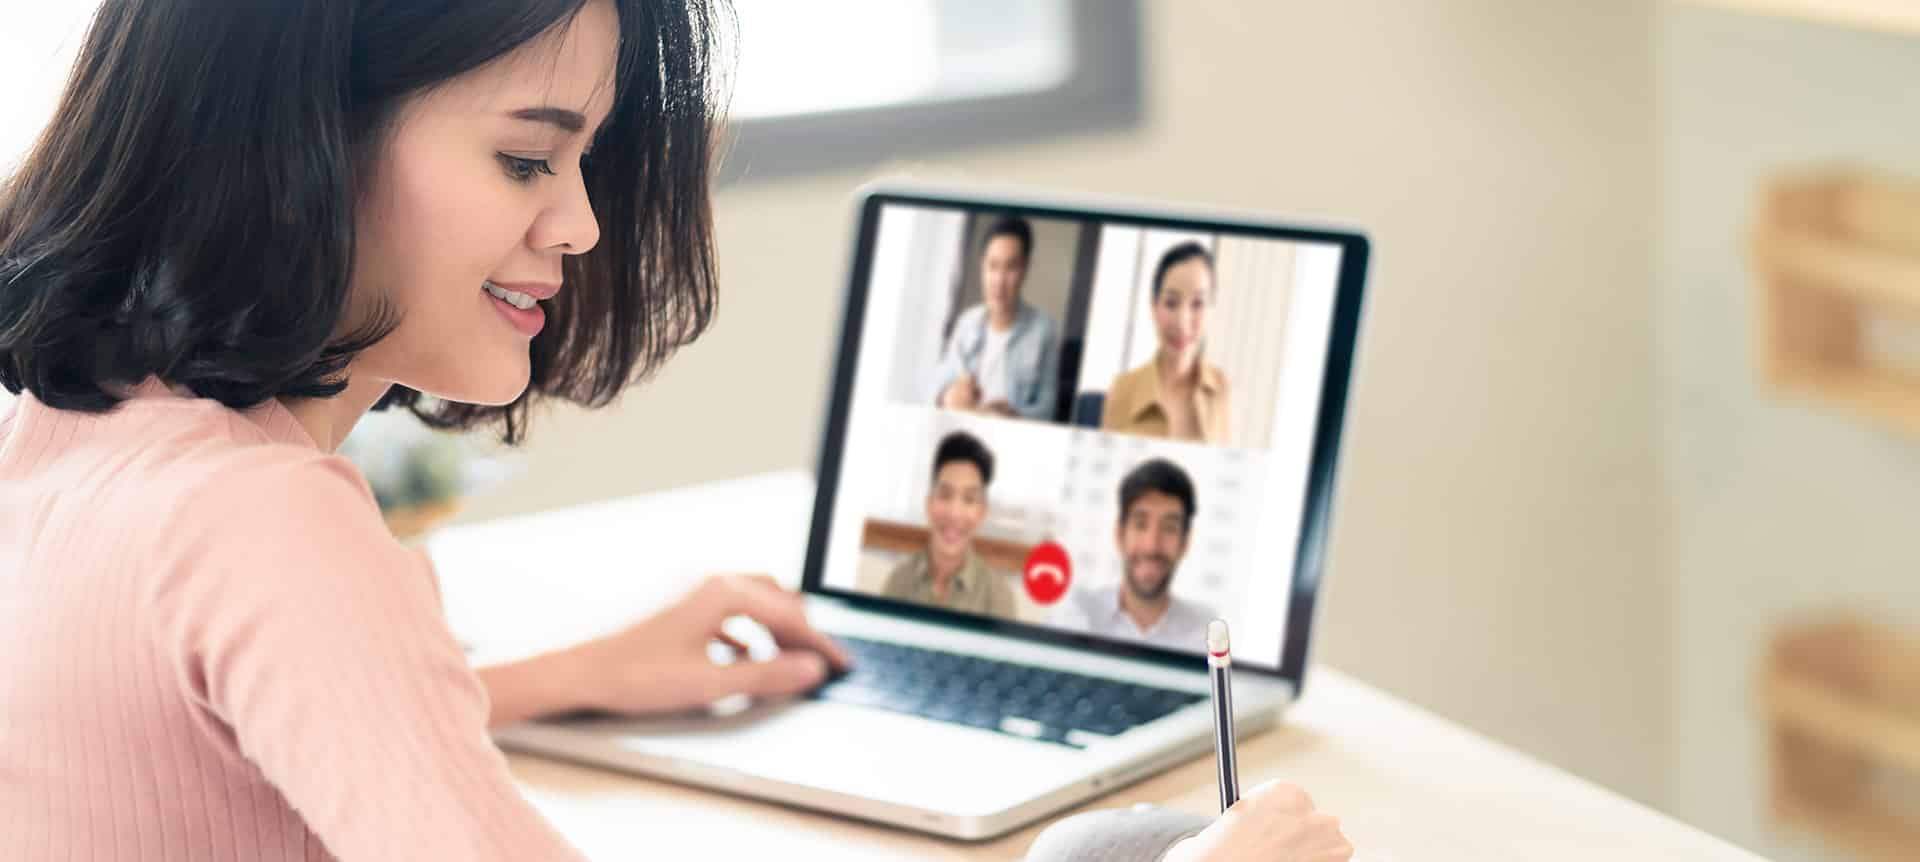 video interviewing software being used by recruiter